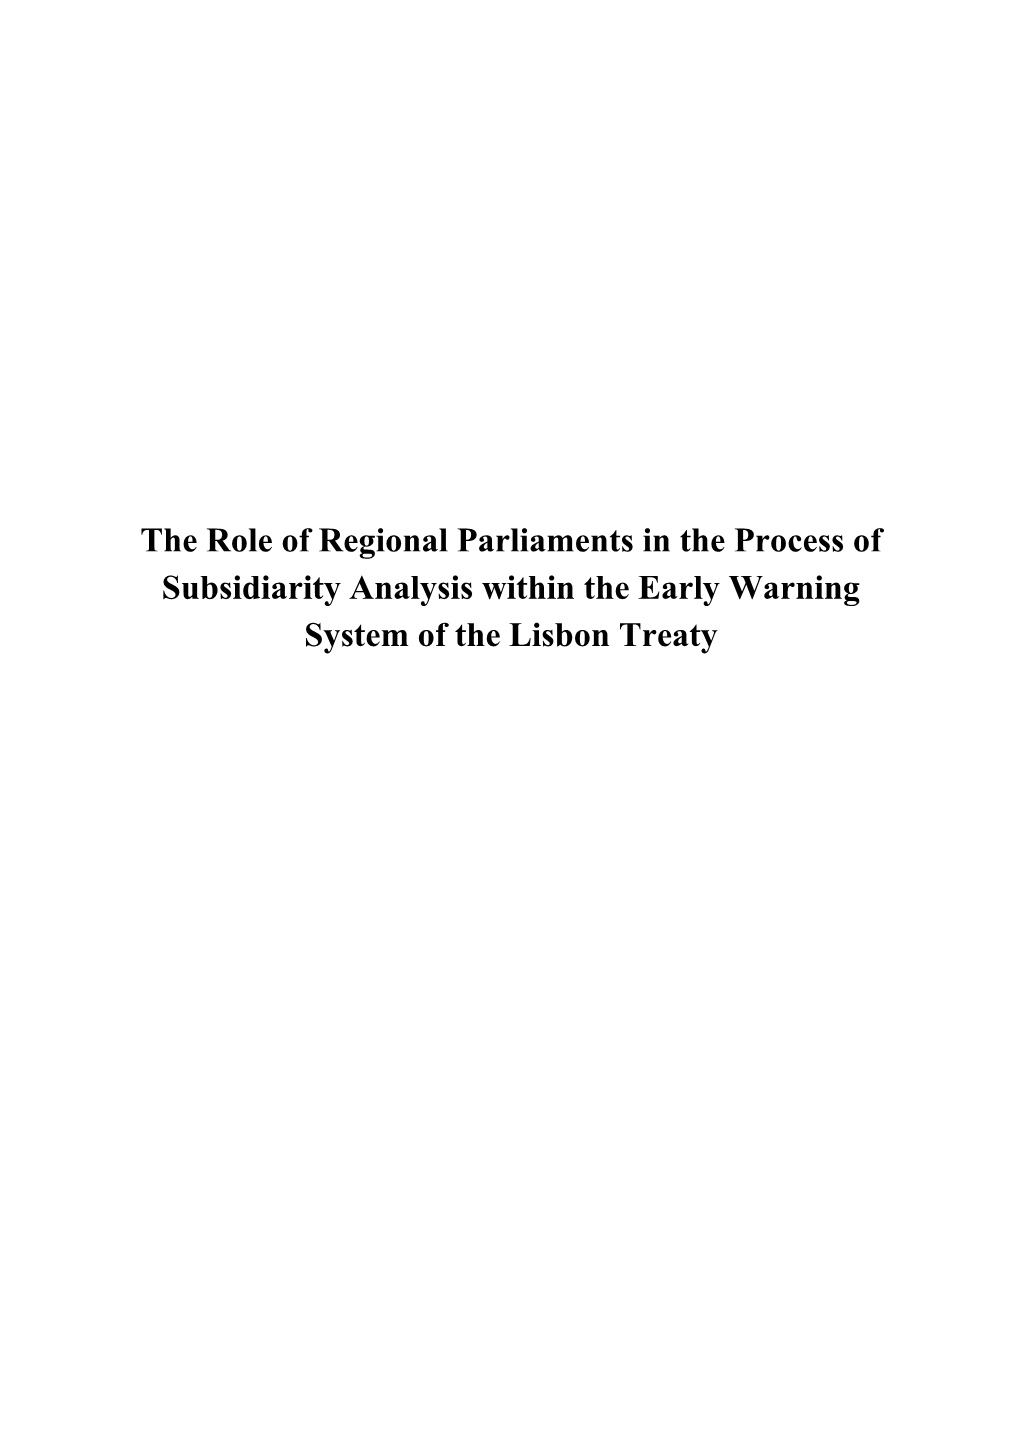 The Role of Regional Parliaments in the Process of Subsidiarity Analysis Within the Early Warning System of the Lisbon Treaty